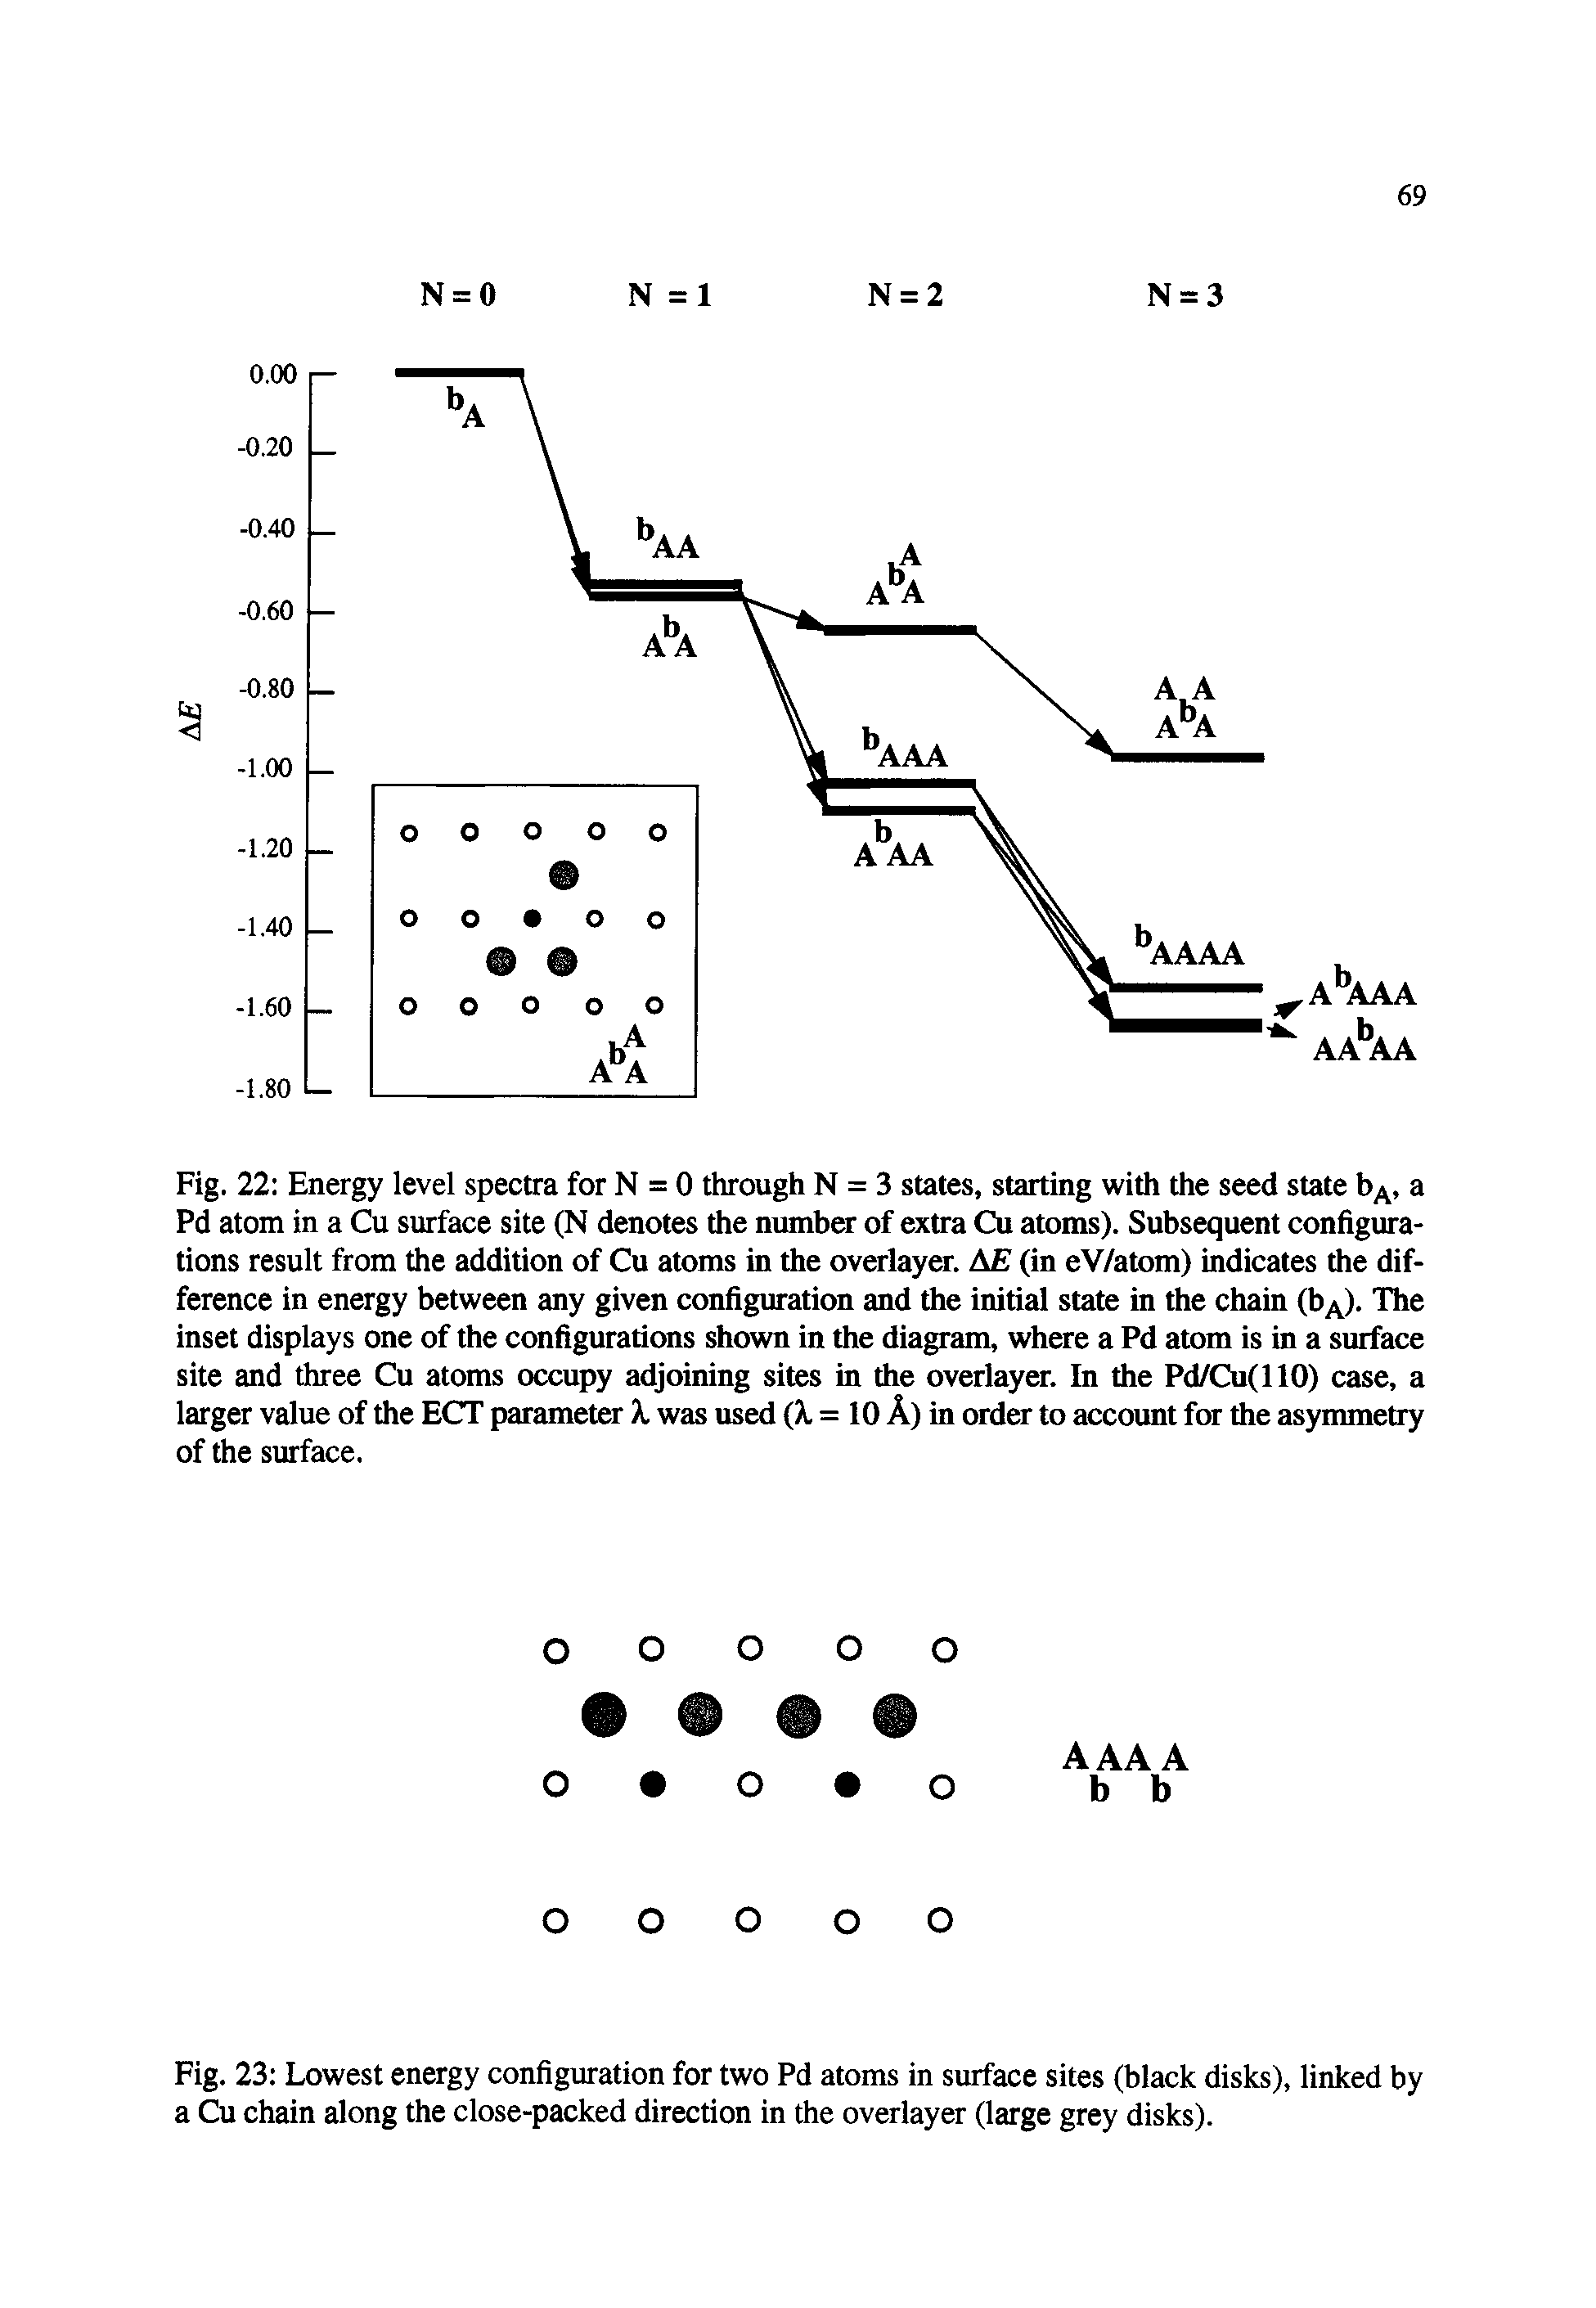 Fig. 22 Energy level spectra for N = 0 through N = 3 states, starting with the seed state b, a Pd atom in a Cu surface site (N denotes the number of extra Cu atoms). Subsequent configurations result from the addition of Cu atoms in the overlayer. A (in eV/atom) indicates the difference in energy between any given configuration and the initial state in the chain (bA). The inset displays one of the configurations shown in the diagram, where a Pd atom is in a surface site and three Cu atoms occupy adjoining sites in the overlayer. In the Pd/Cu(110) case, a larger value of the ECT parameter X was used (A. = 10 A) in order to account for the asymmetry of the surface.